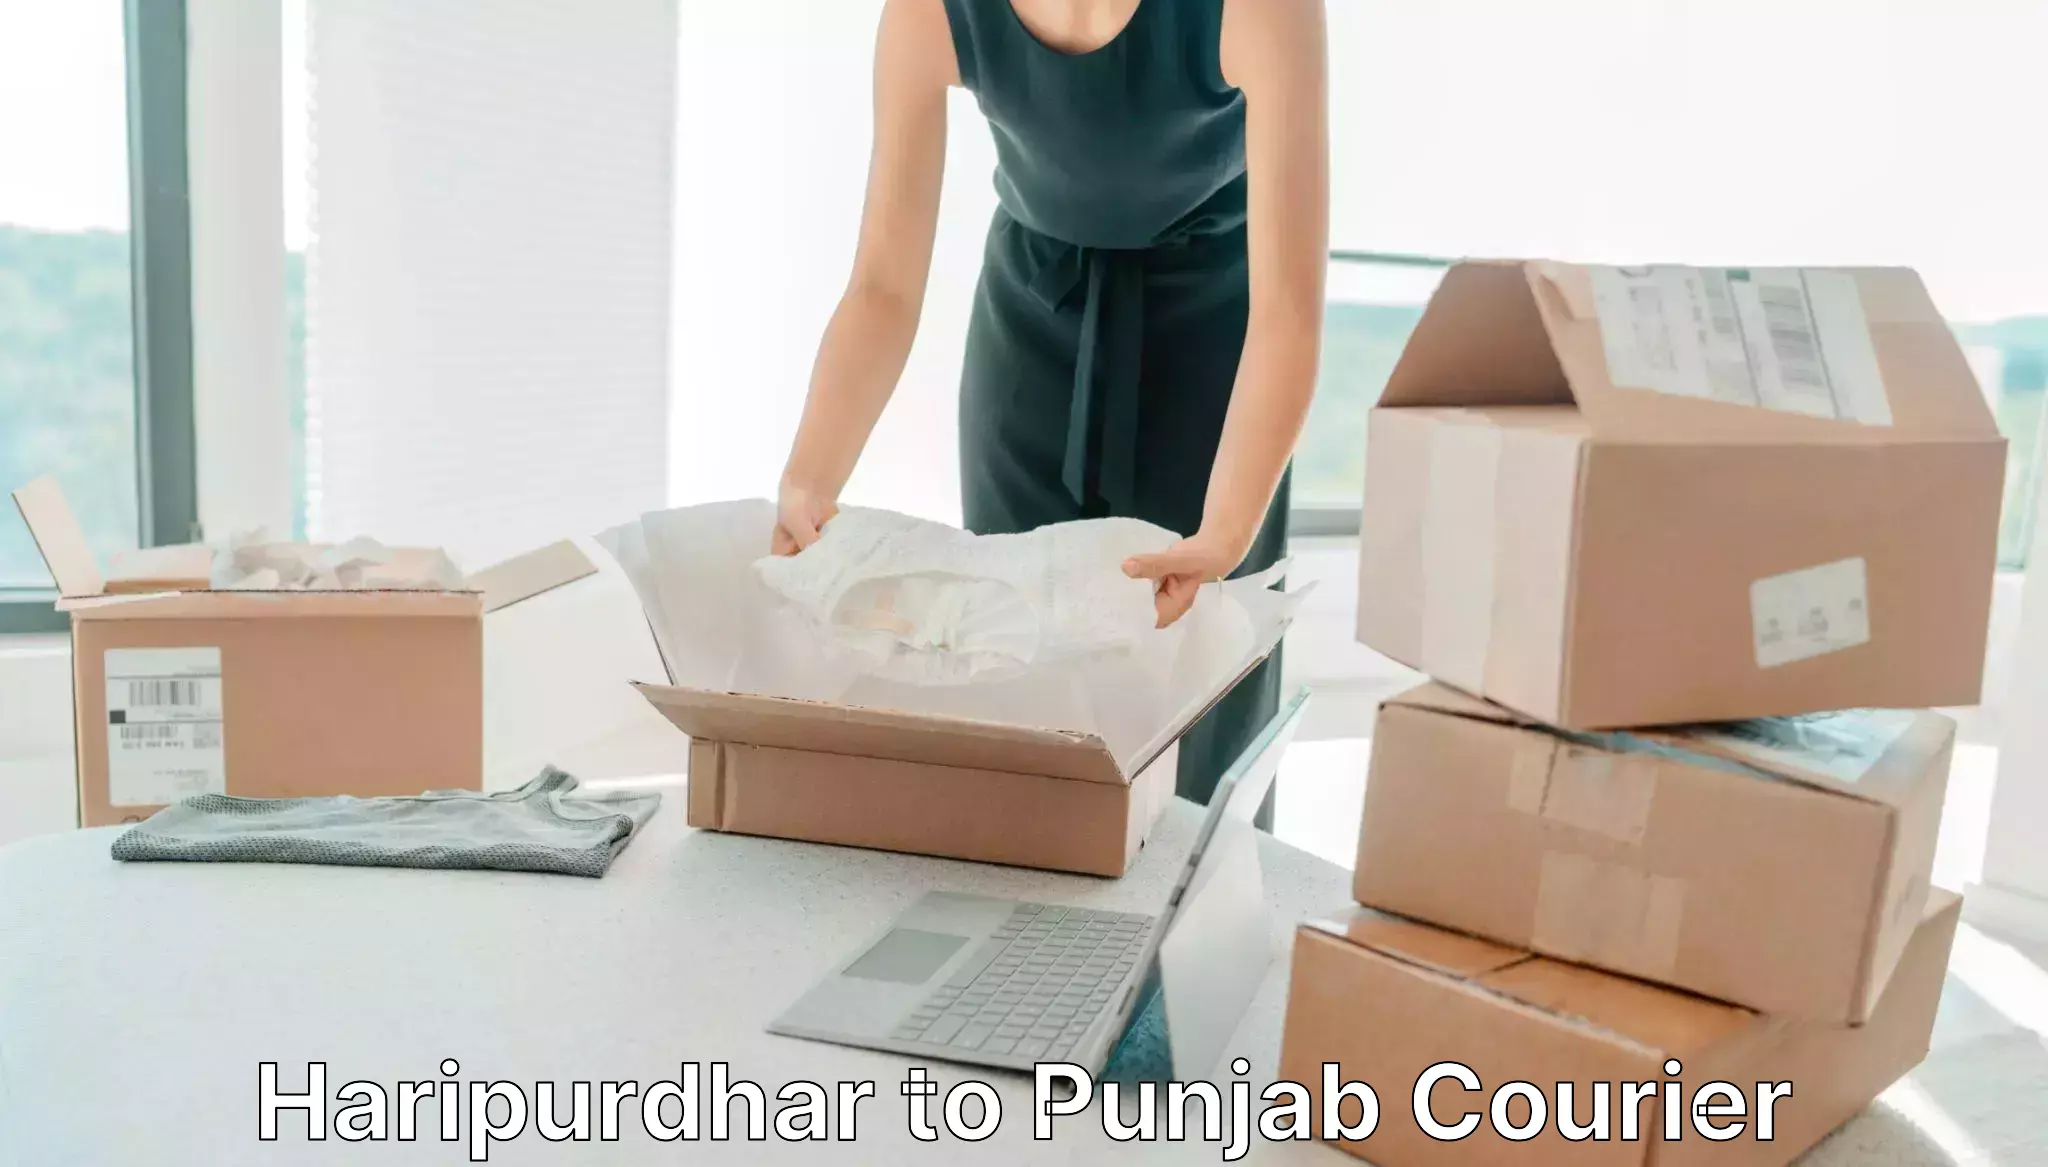 Courier service comparison in Haripurdhar to Jalalabad